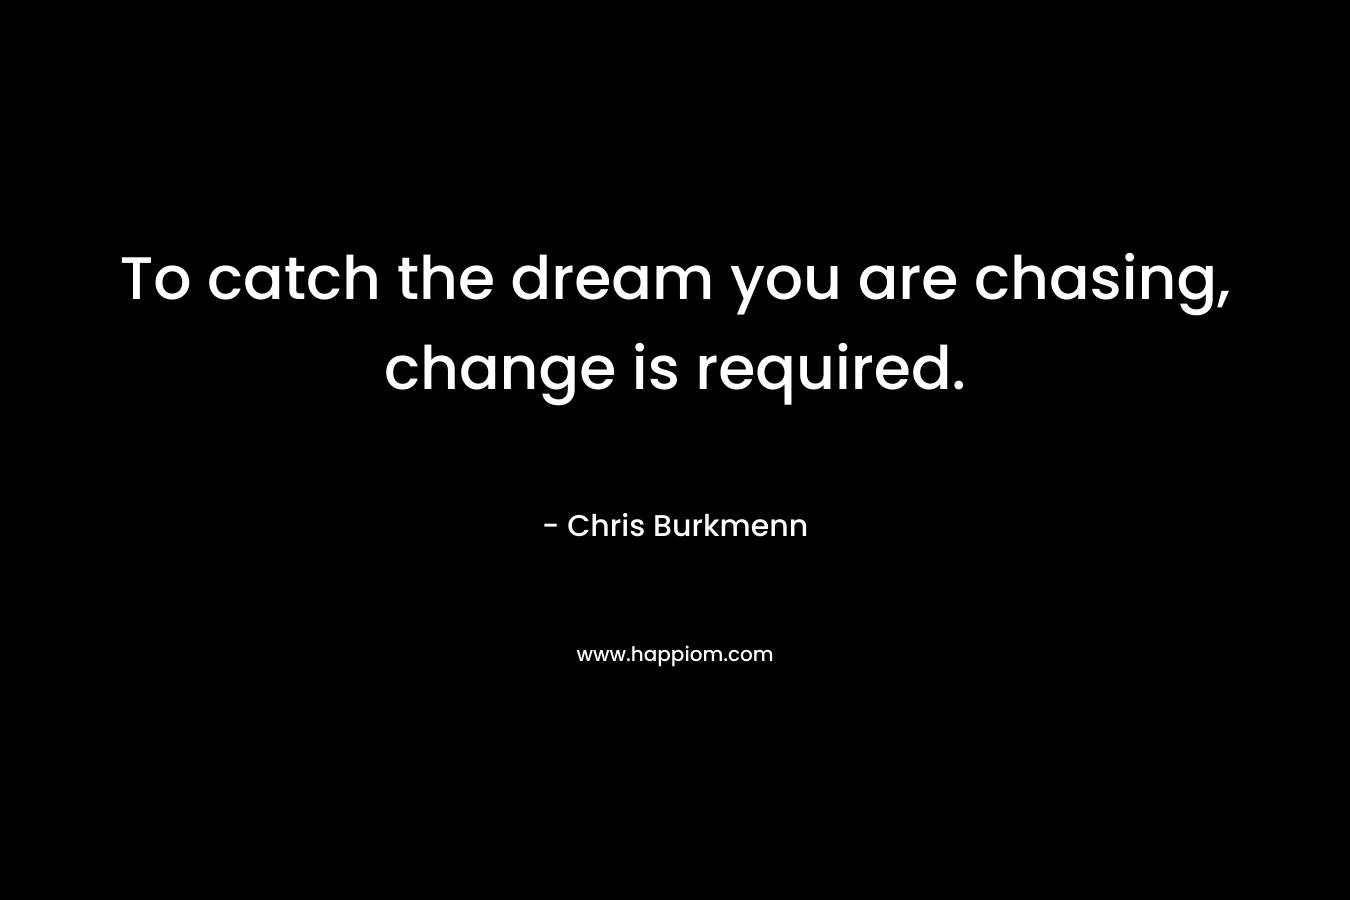 To catch the dream you are chasing, change is required.